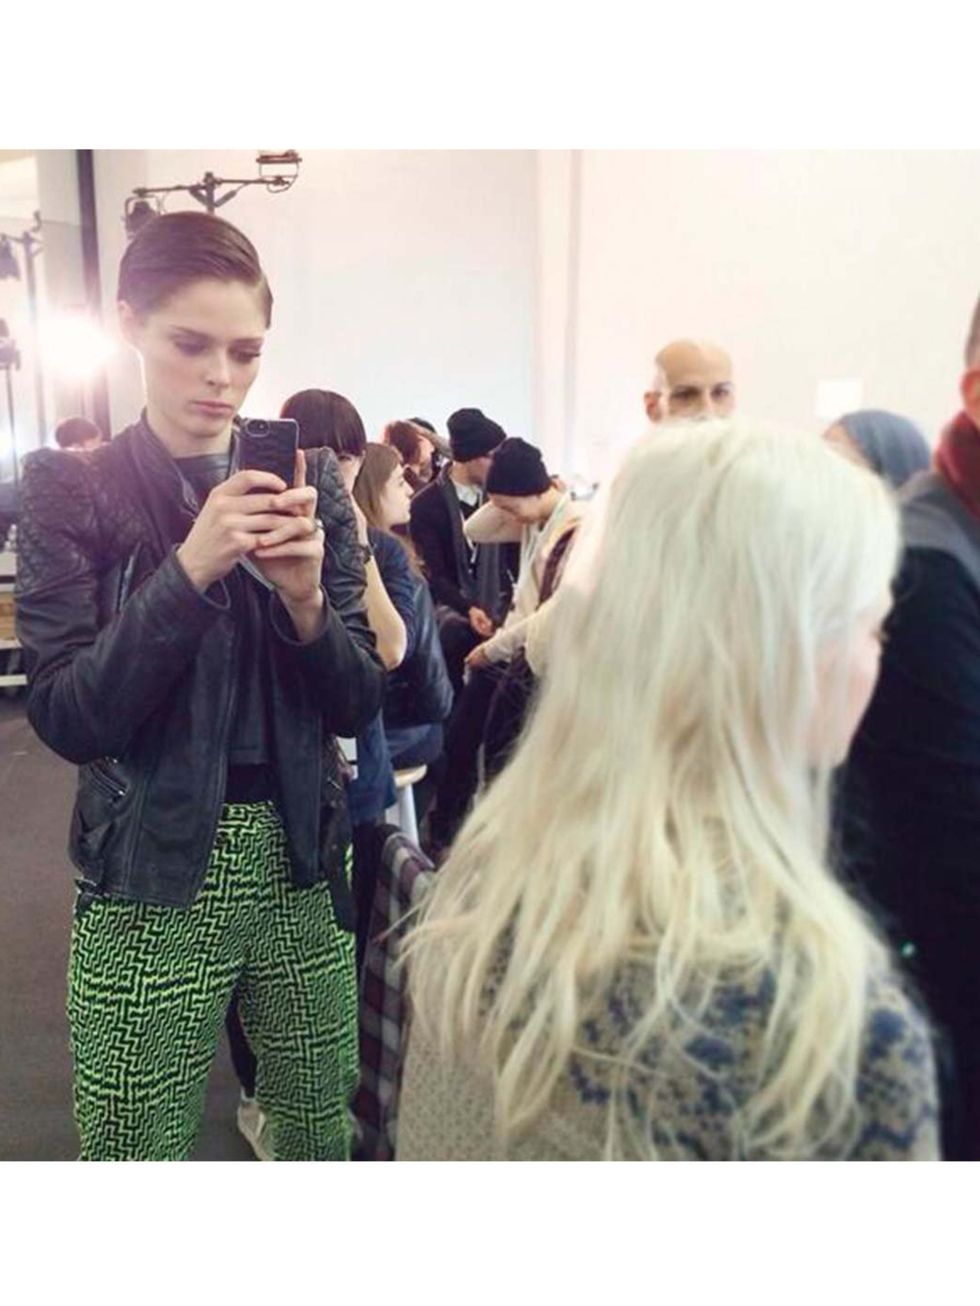 <p><a href="http://www.elleuk.com/star-style/celebrity-style-files/coco-rocha">Coco Rocha</a>(@cocorocha)</p><p>'I'm backstage bright and early at @VictoriaBeckham reporting live for @PatMcGrathReal and @MaxFactorUK. Stay tuned!'</p>